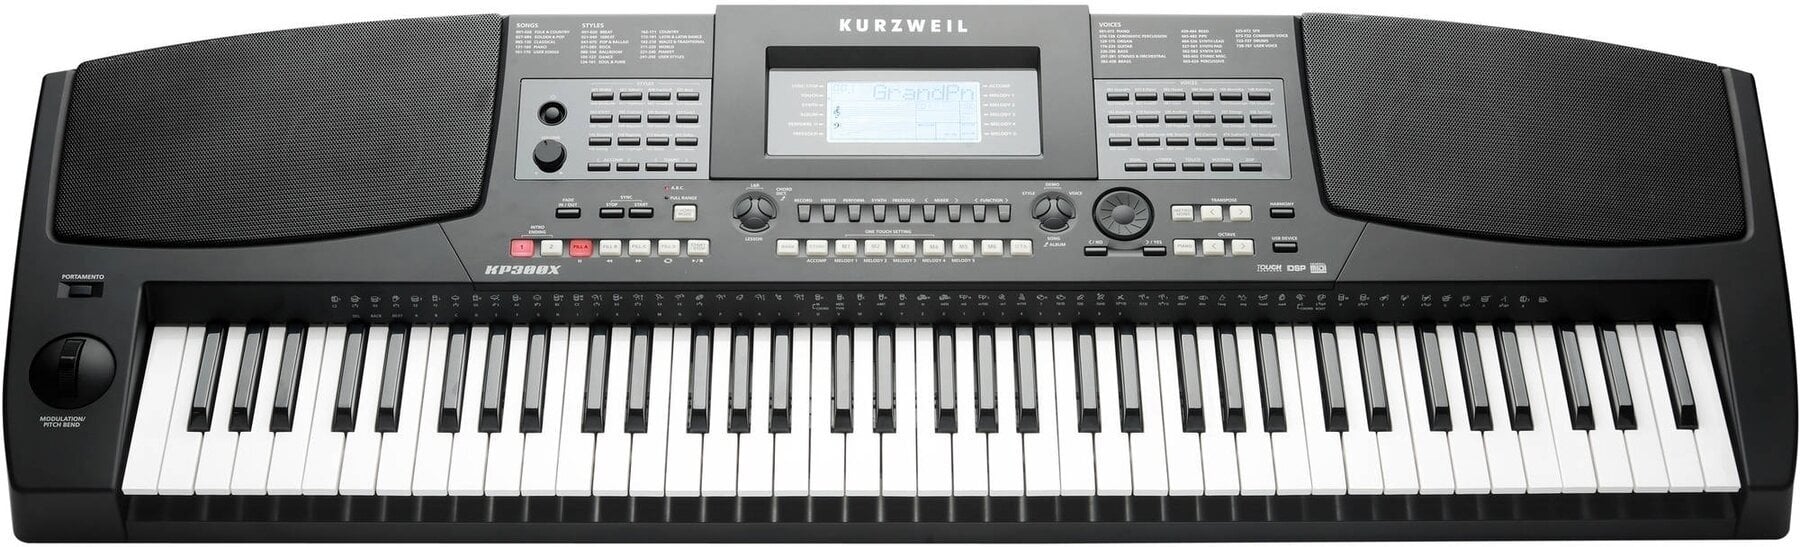 Keyboard with Touch Response Kurzweil KP300X